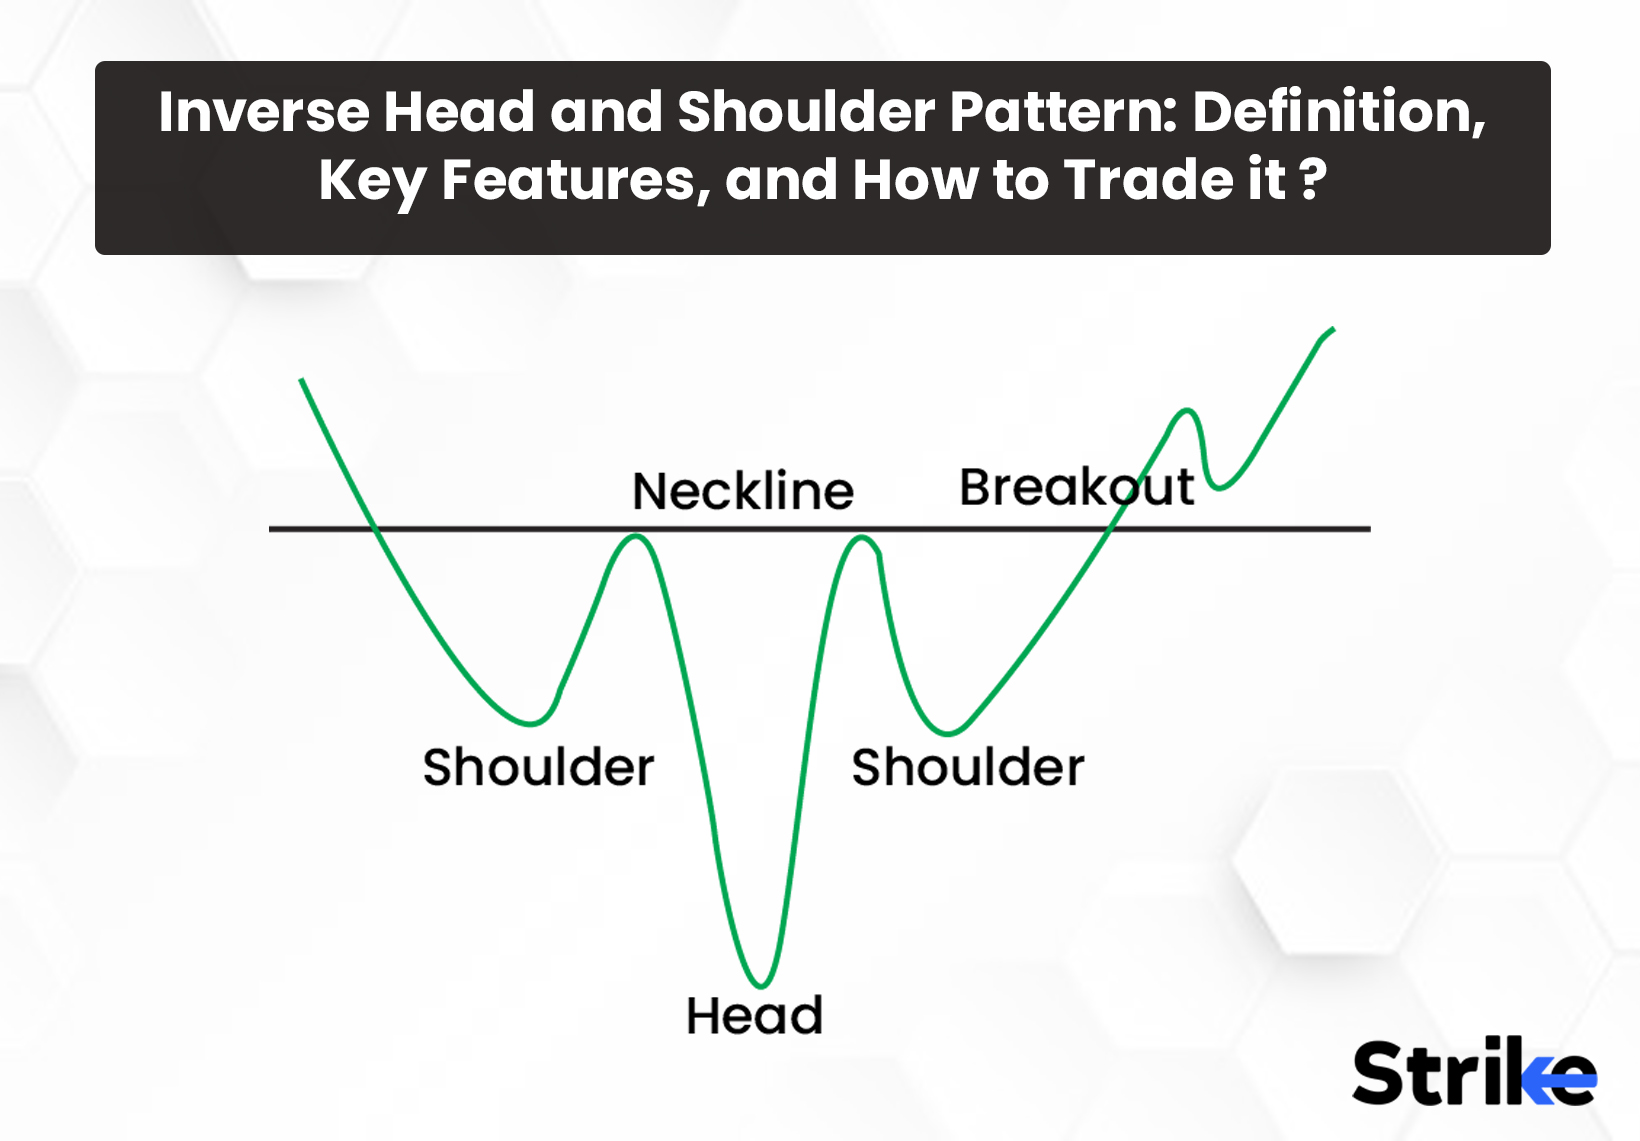 Inverse Head and Shoulder Pattern: Definition, Key Features, and How to Trade it